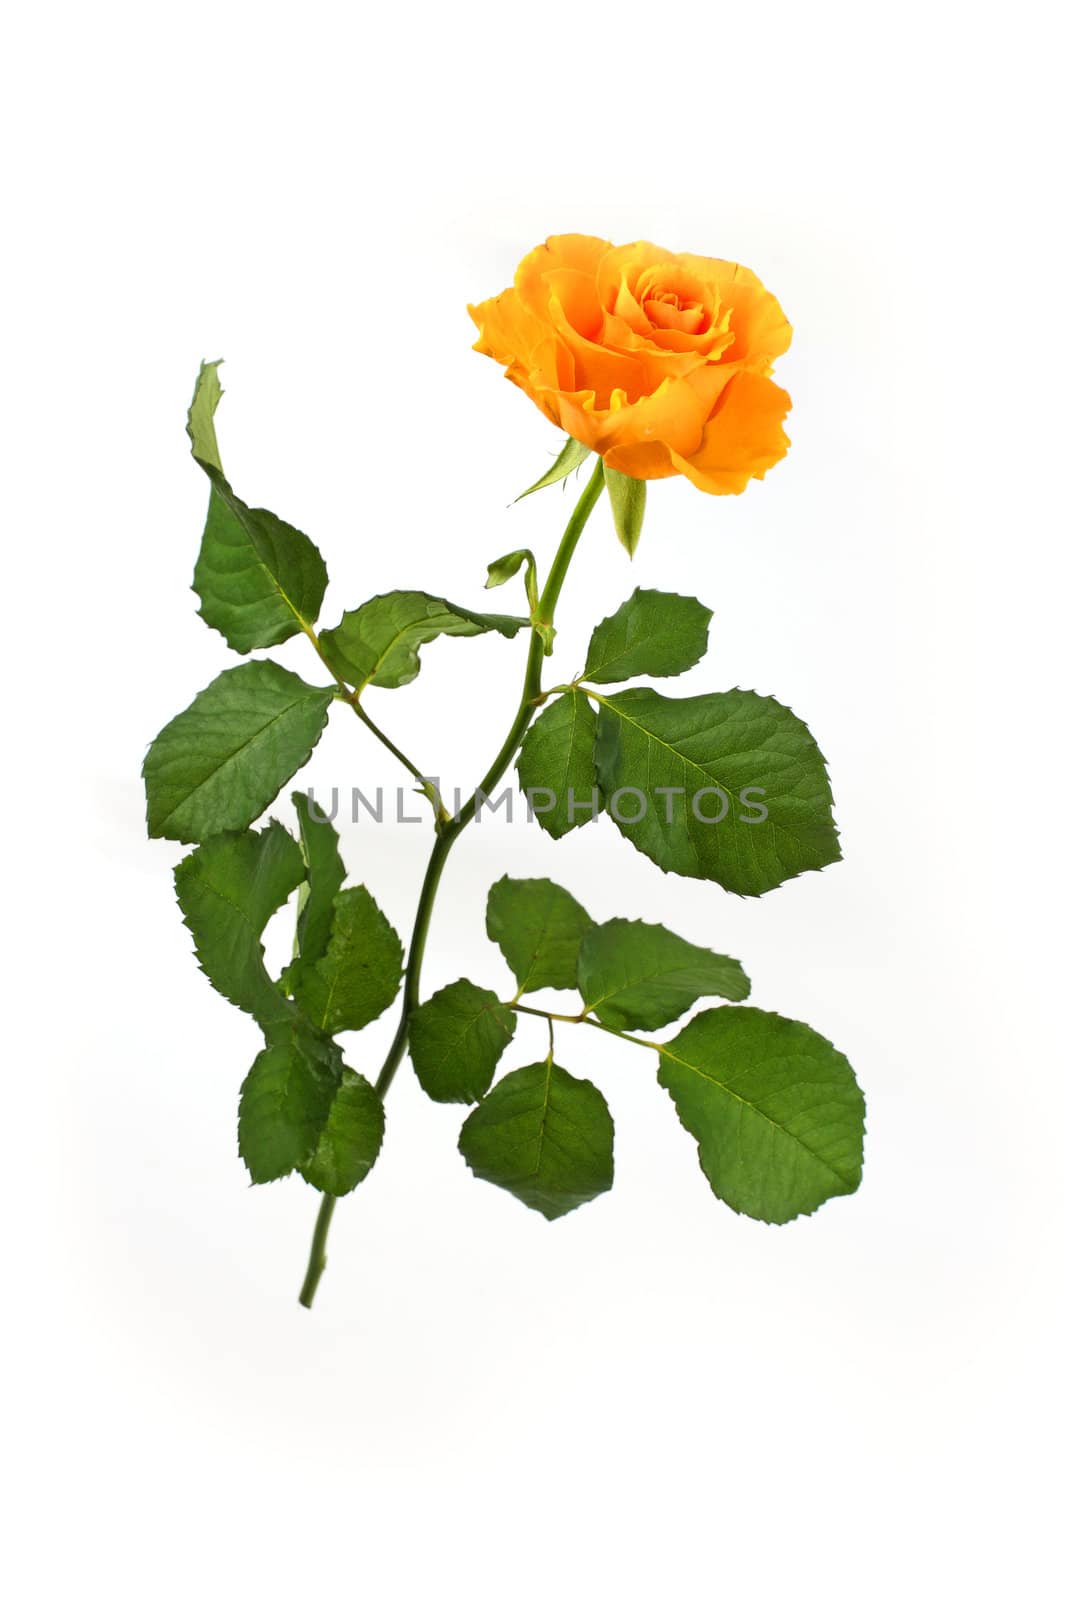 Isolated yellow rose against white background